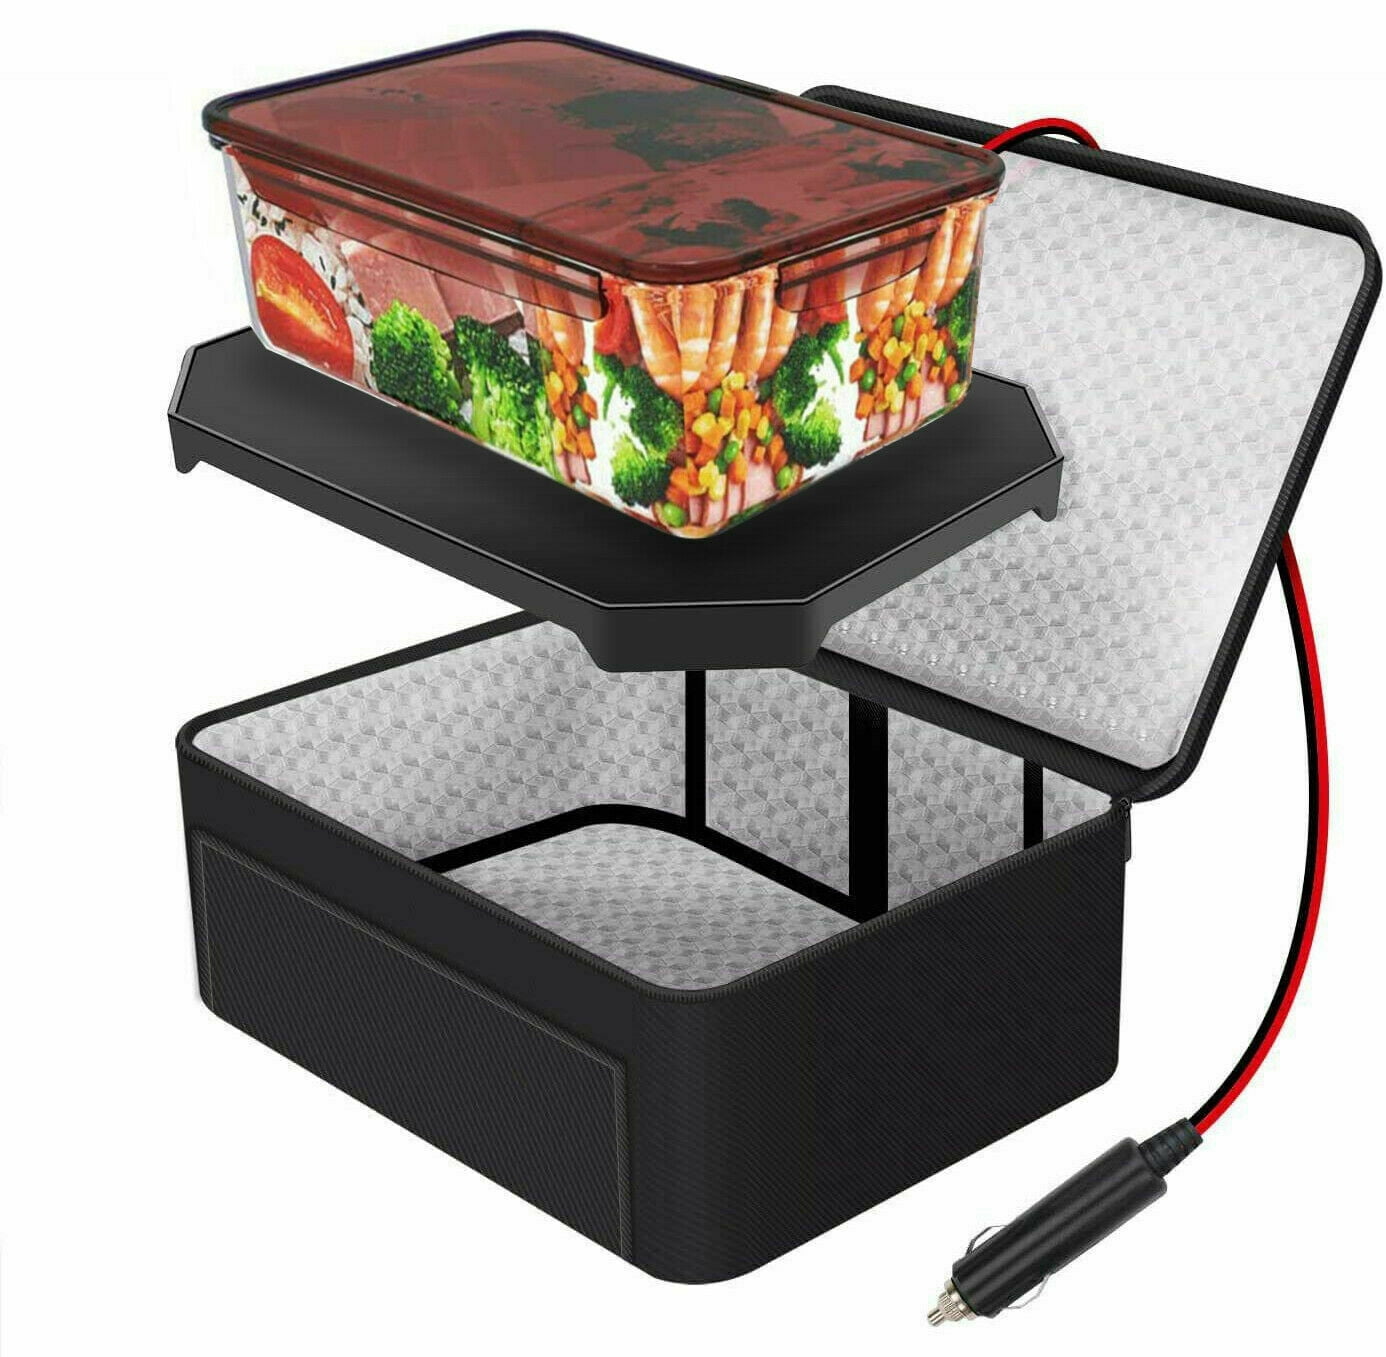 Details about   Portable Food Warmers Electric Heater Lunch Box Mini Oven Travel 120V Office 